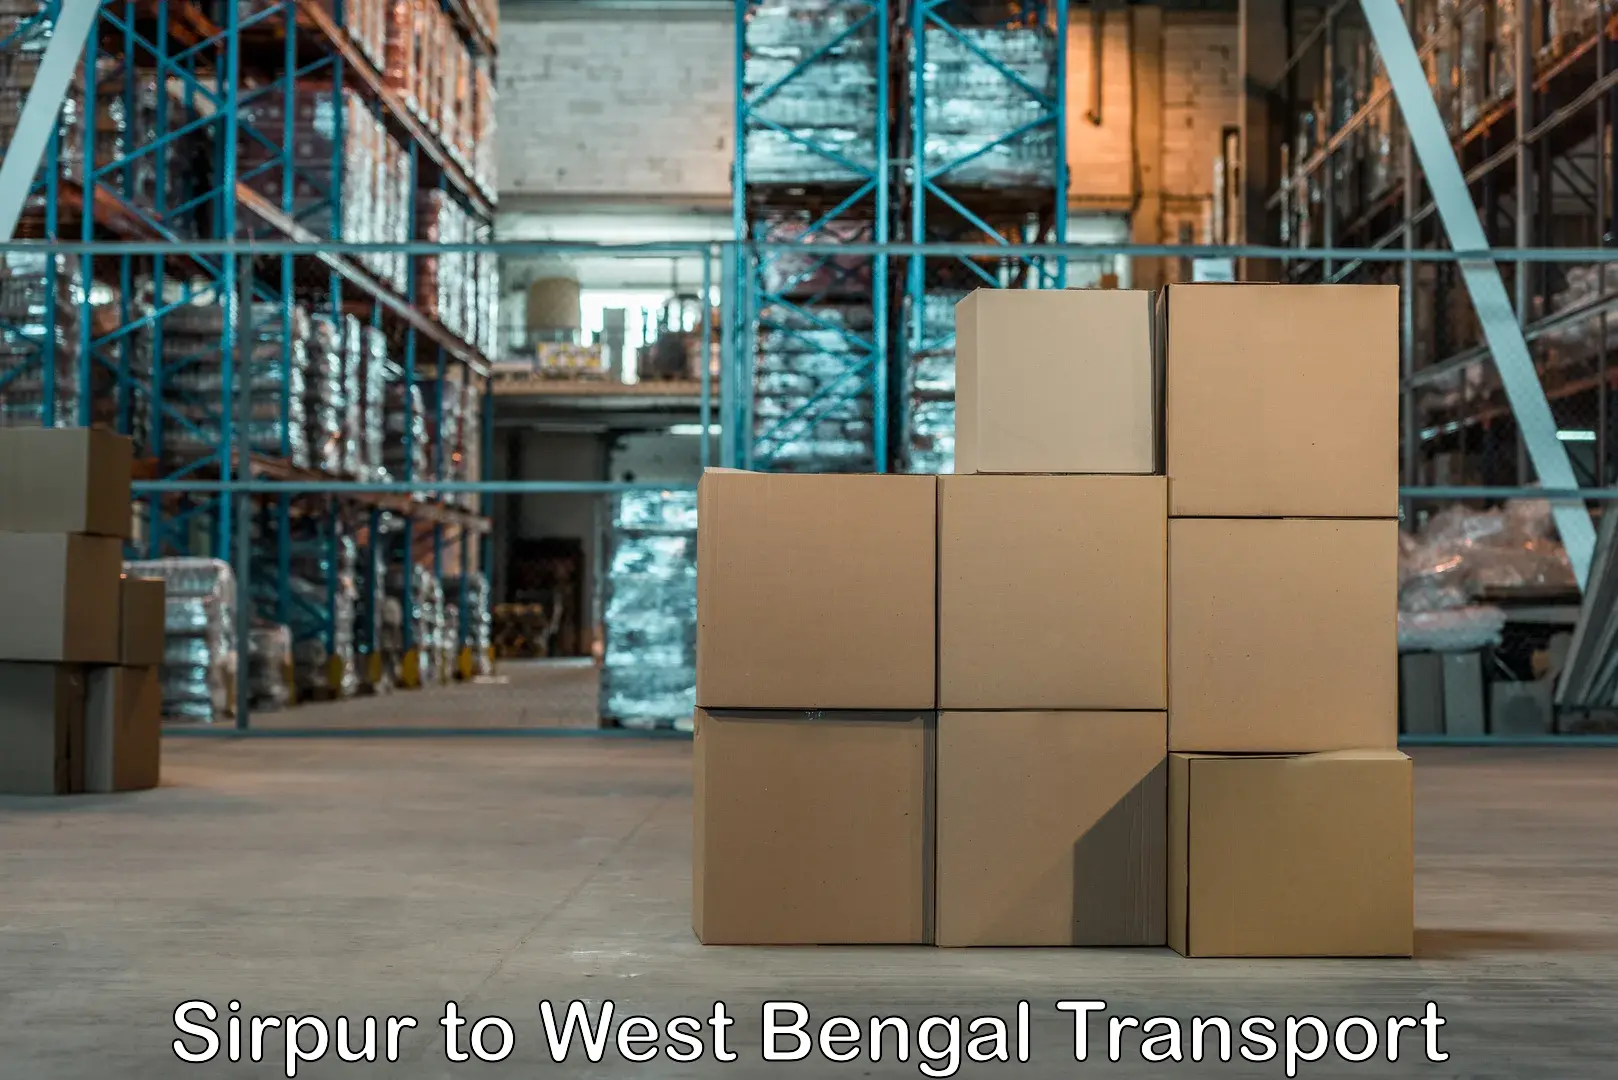 Transport in sharing Sirpur to West Bengal